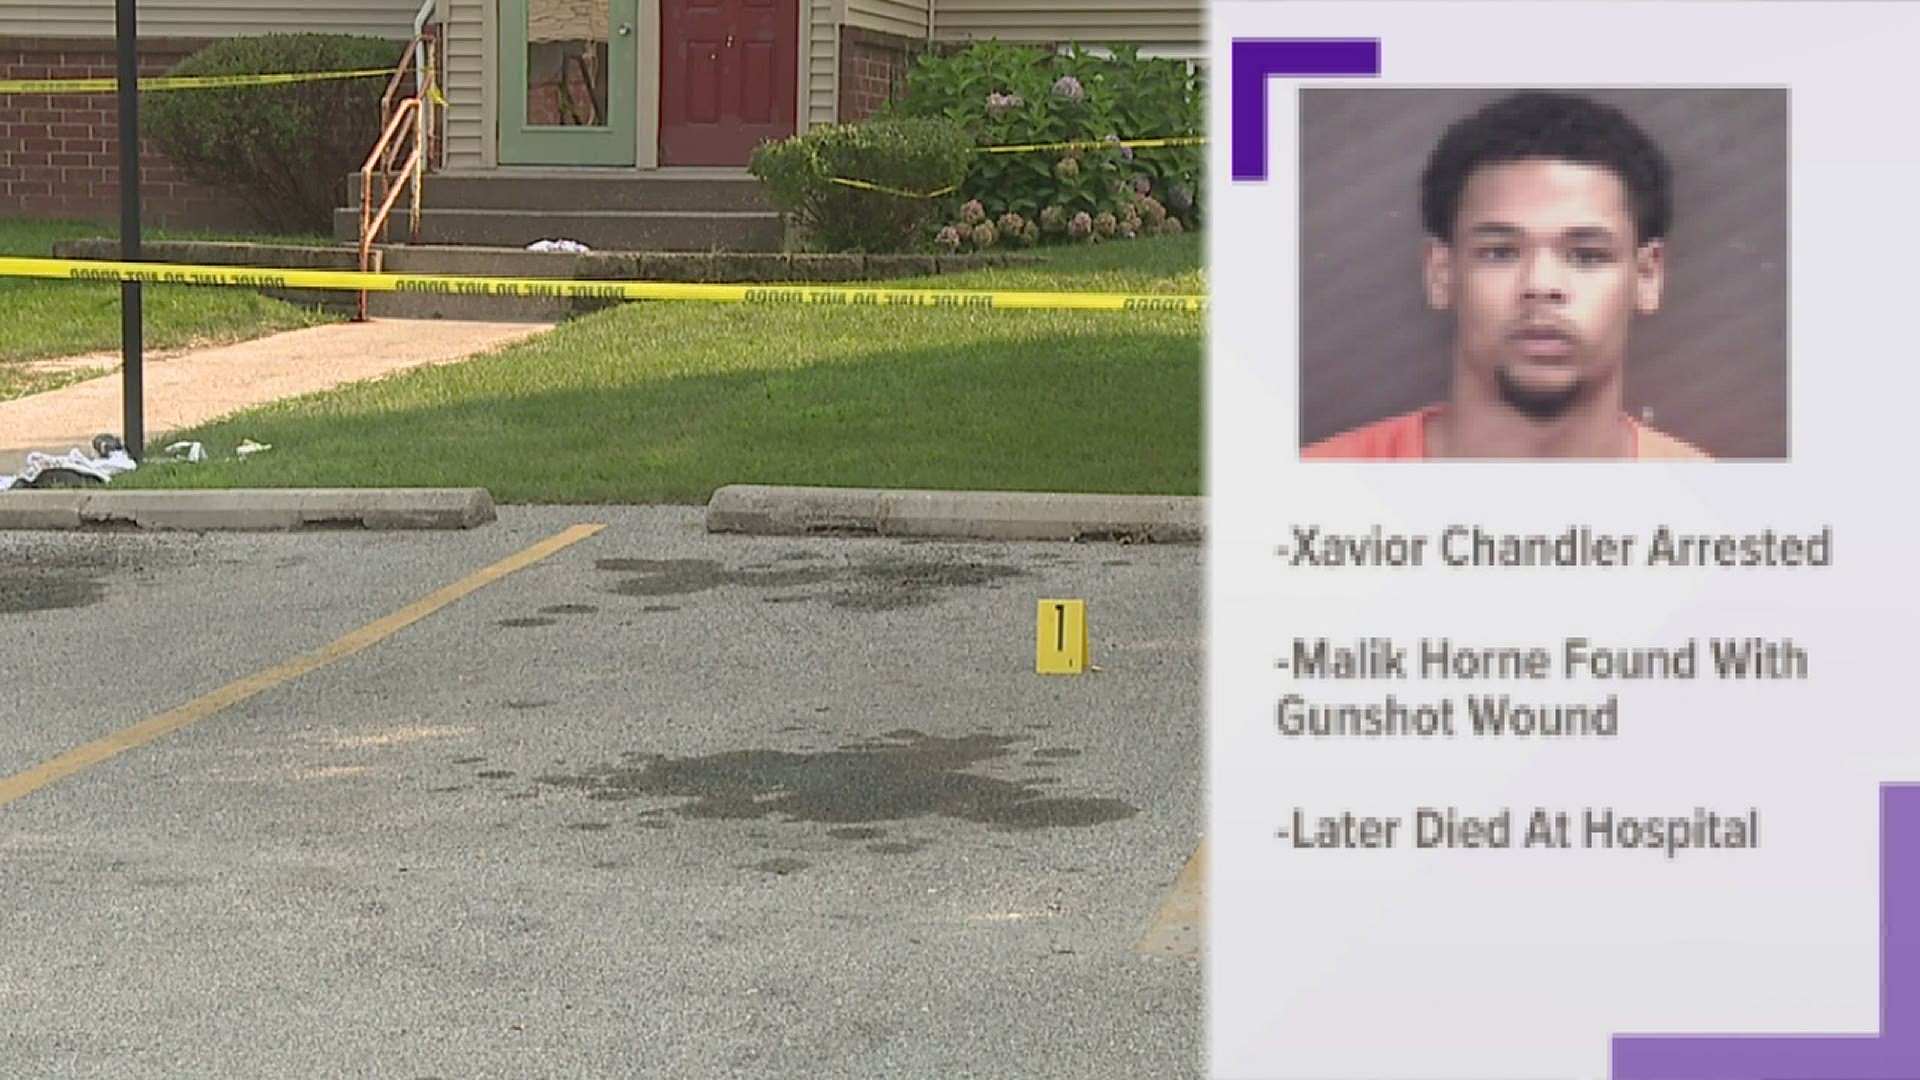 Xavior Chandler has been arrested in connection with the death of Malik Horne.